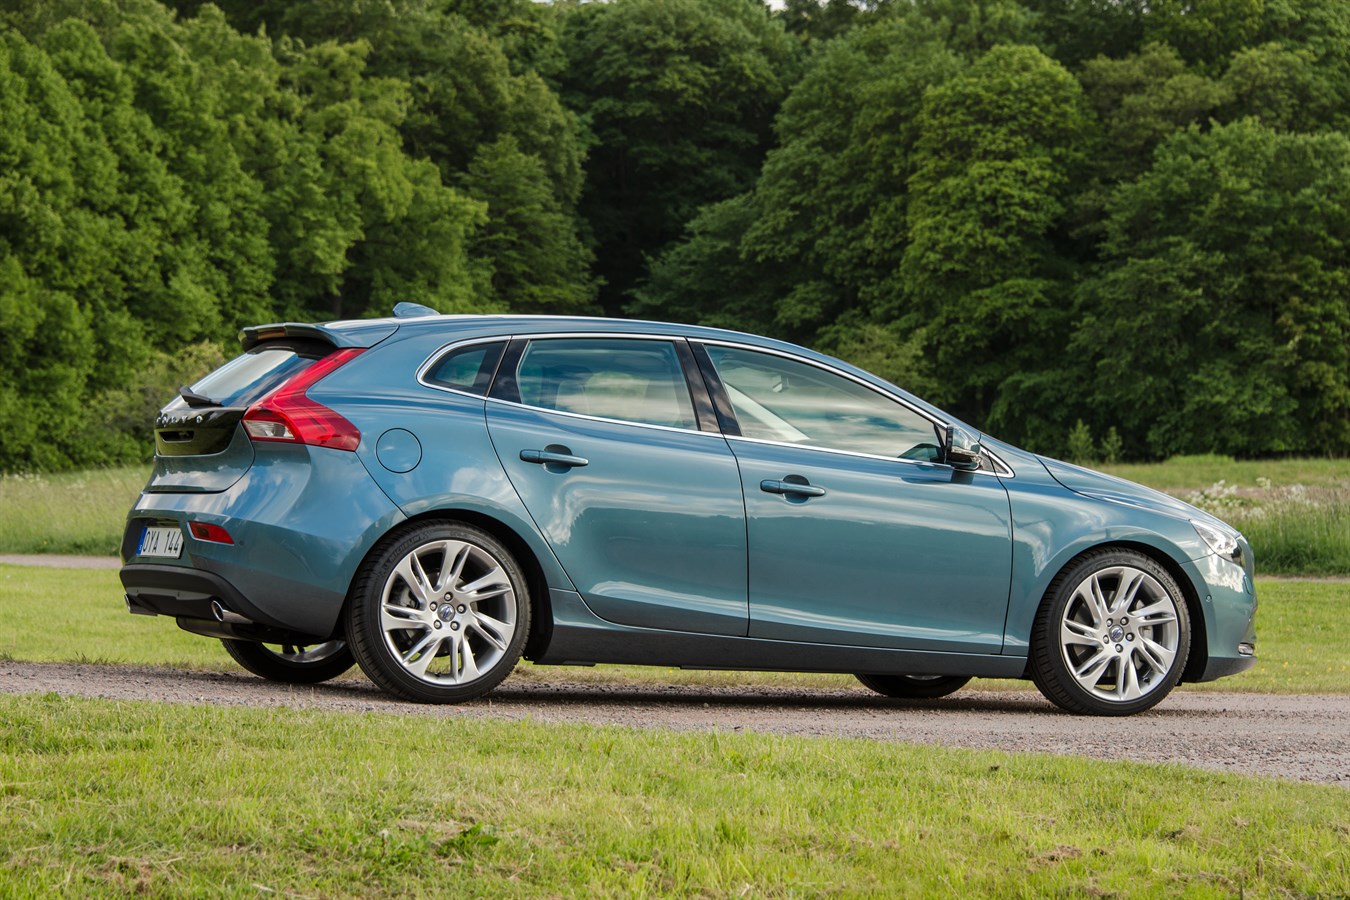 Five stars and a record result for the Volvo V40 in China NCAP safety test  - Volvo Cars Global Media Newsroom